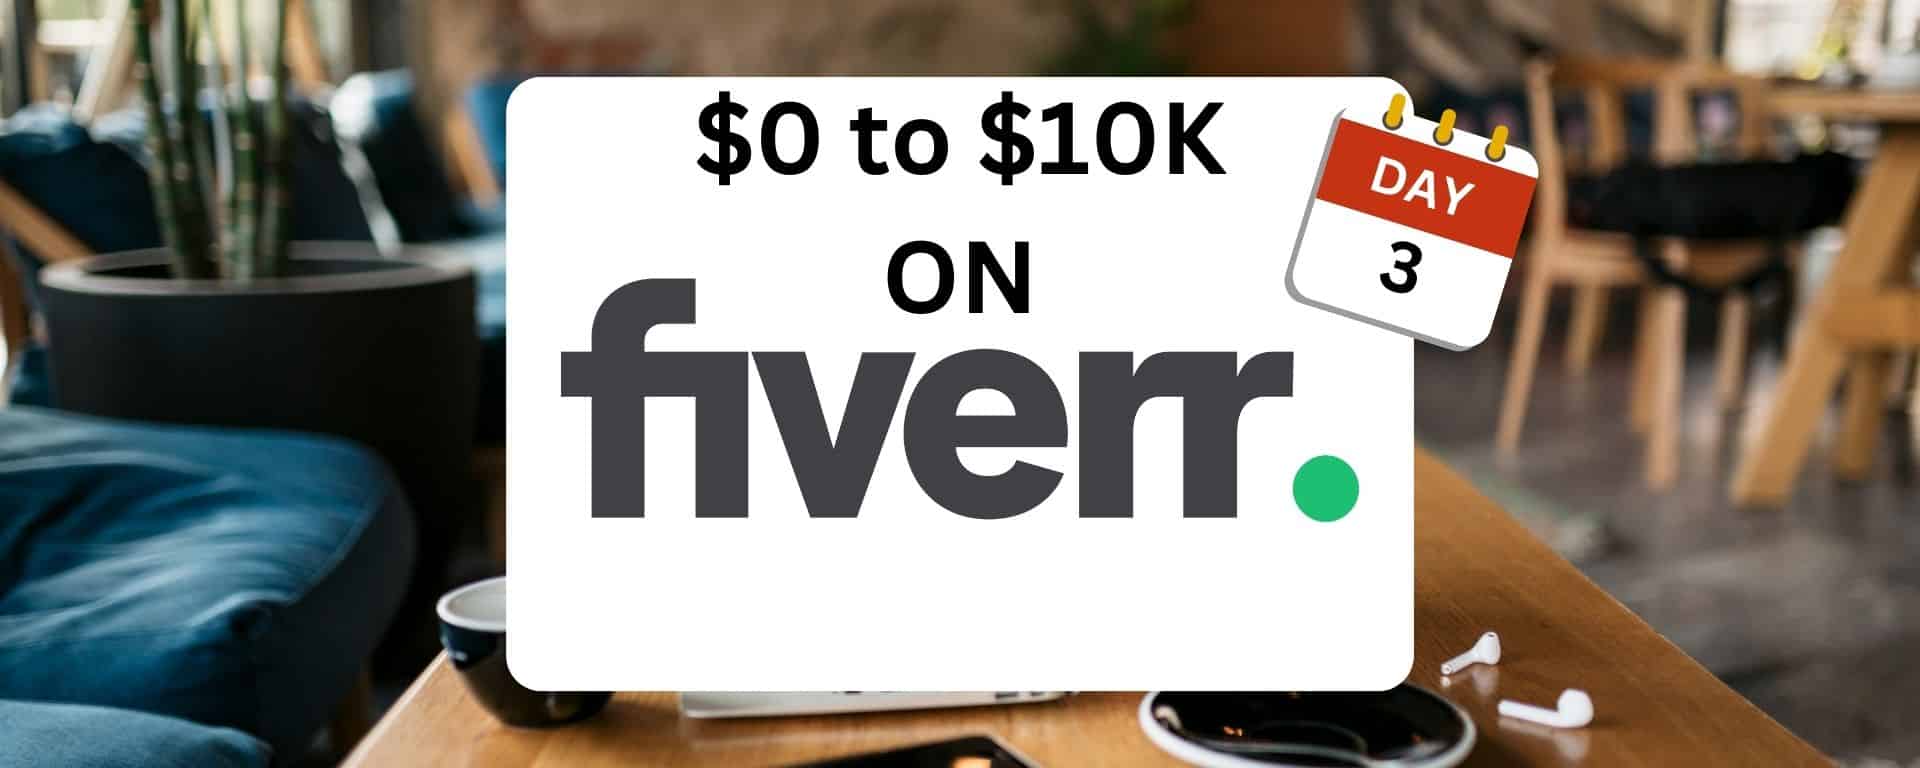 $0 to $10K on Fiverr - Day 3